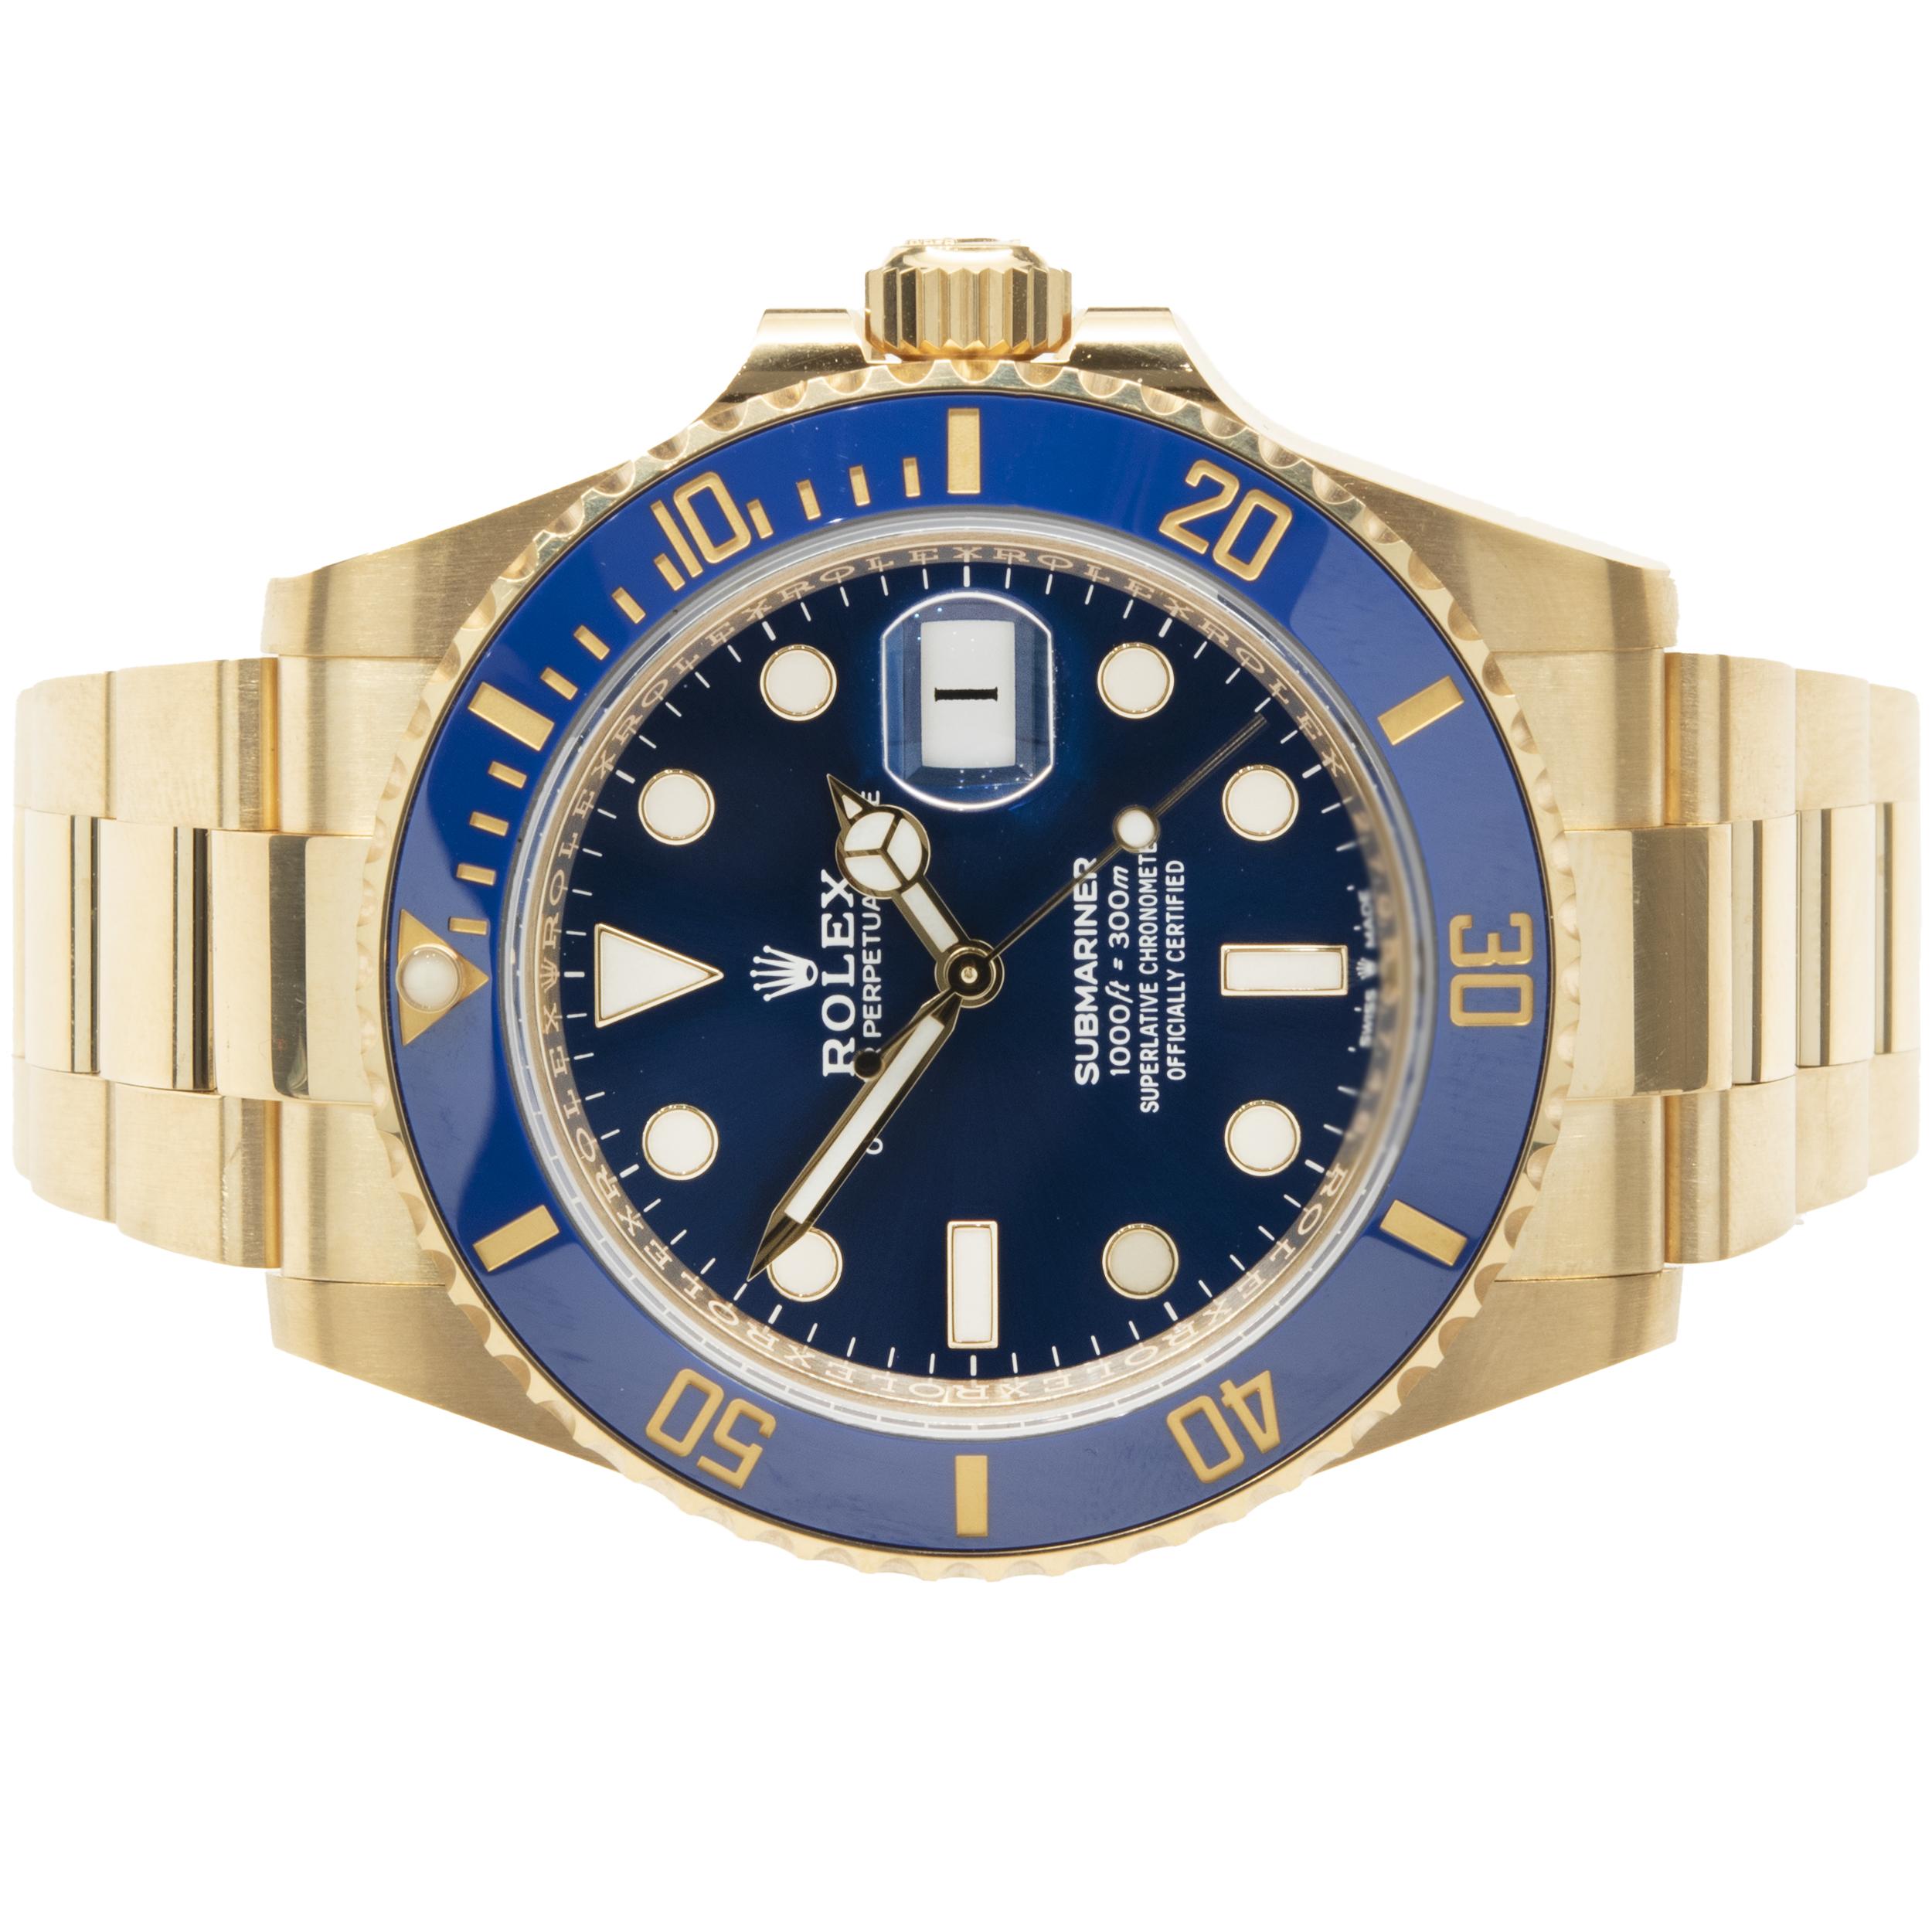 Movement: automatic
Function: hours, minutes, seconds, date
Case: round 41mm 18K yellow gold case with blue ceramic & 18k yellow gold diving bezel, sapphire protective crystal, screw-down crown, water resistant to 300 meters
Band: 18k yellow gold